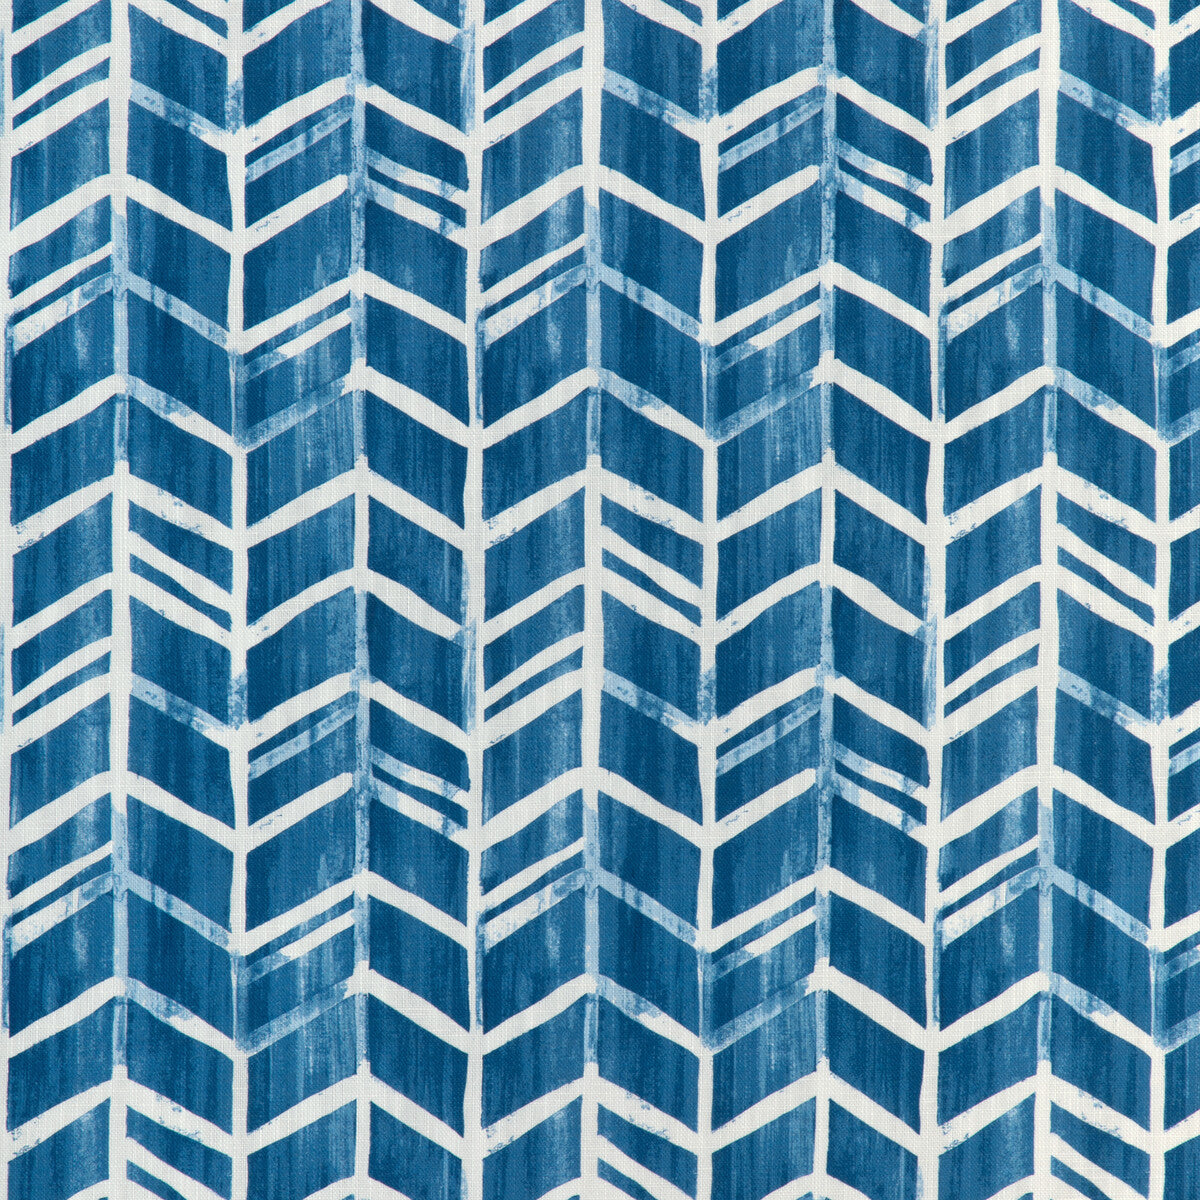 Dont Fret fabric in lake color - pattern DONT FRET.51.0 - by Kravet Basics in the Small Scale Prints collection